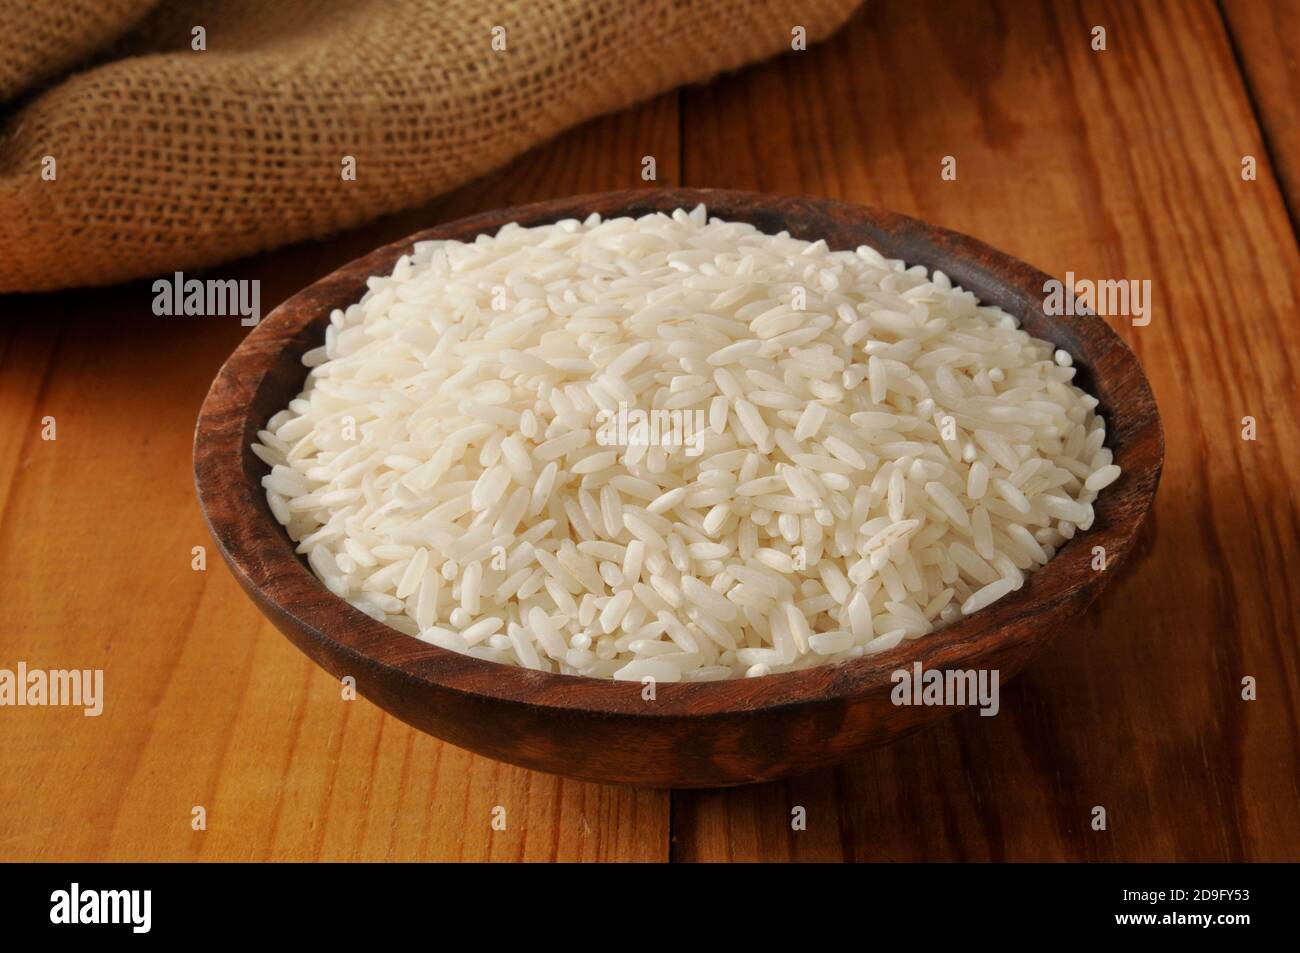 A wooden bowl of long grain white rice Stock Photo